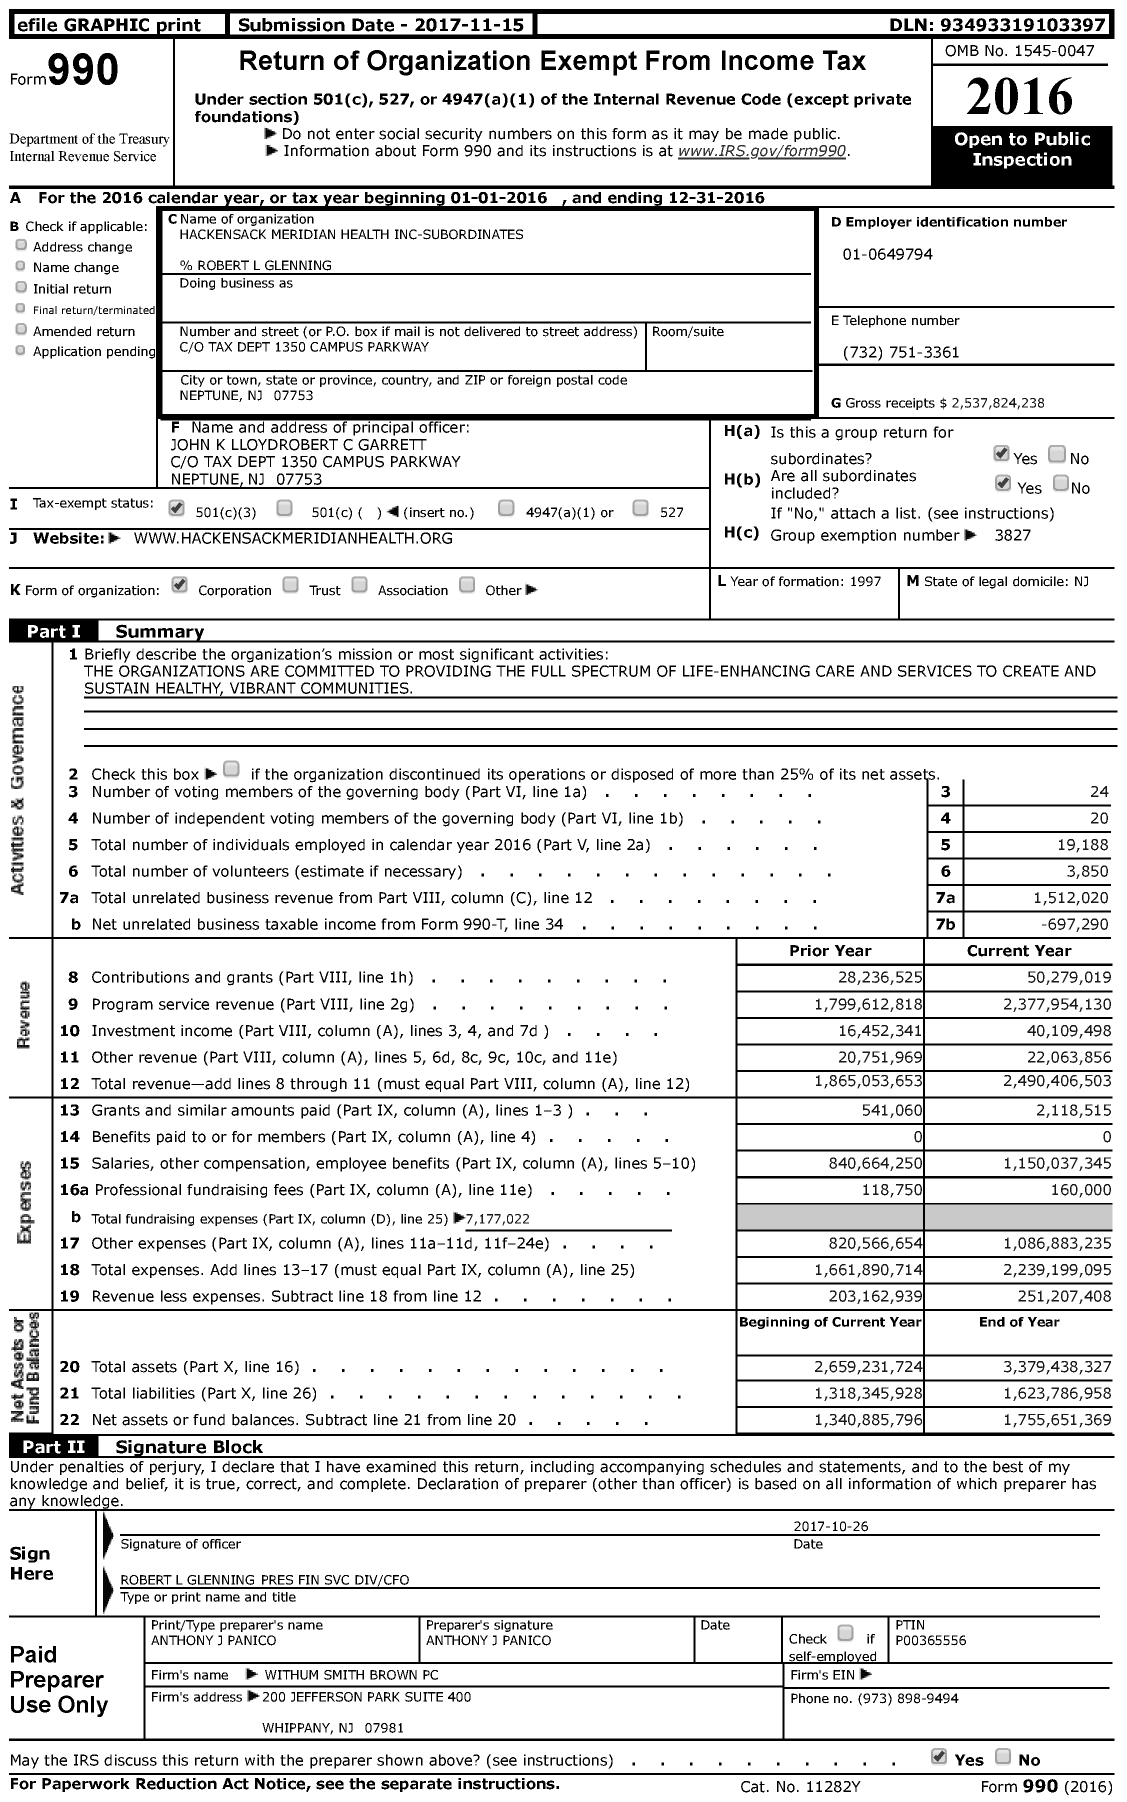 Image of first page of 2016 Form 990 for Hackensack Meridian Health -subordinates (HMH)